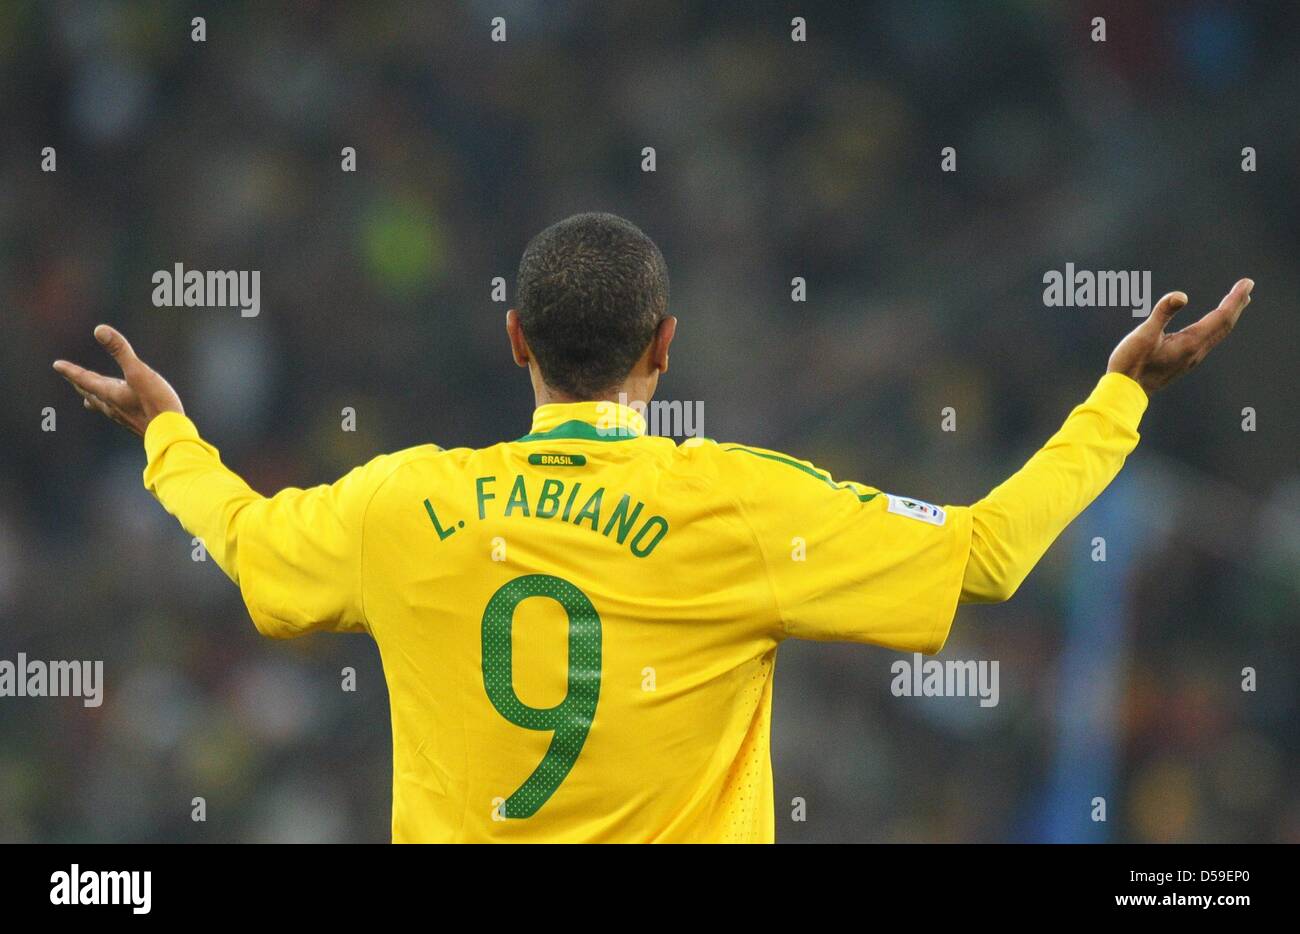 Luis Fabiano of Brazil gestures during the FIFA World Cup 2010 group G match between Brazil and Ivory Coast at the Soccer City Stadium in Johannesburg, South Africa 20 June 2010. Photo: Ronald Wittek dpa - Please refer to http://dpaq.de/FIFA-WM2010-TC Stock Photo